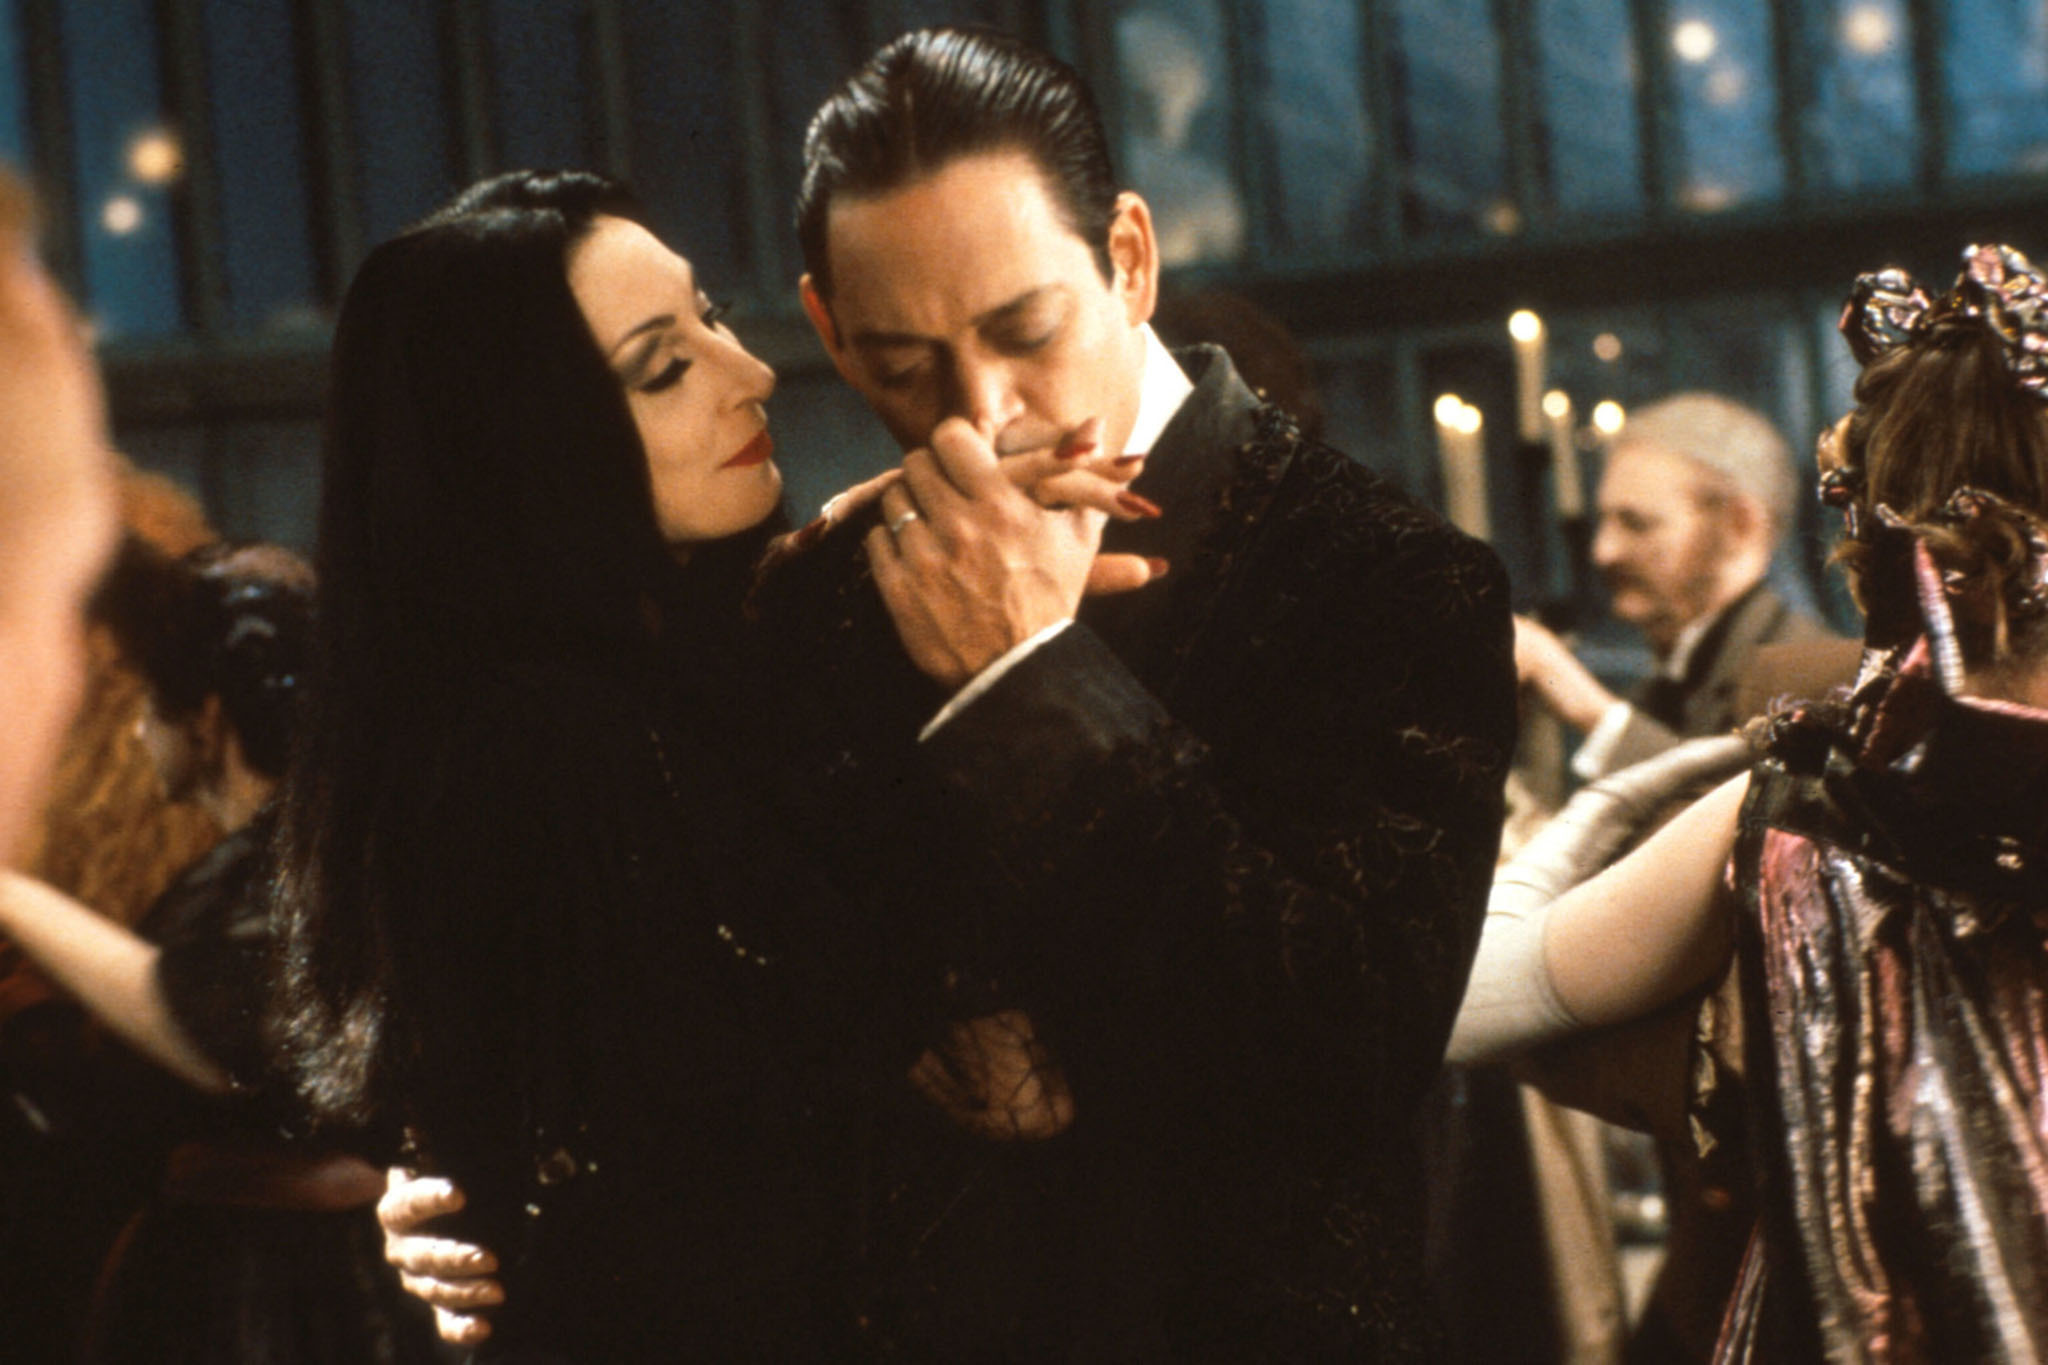 Anjelica Huston and Raul Julia as Morticia and Gomez Addams in usual adoring pose at a family reunion dance to honor Fester's return